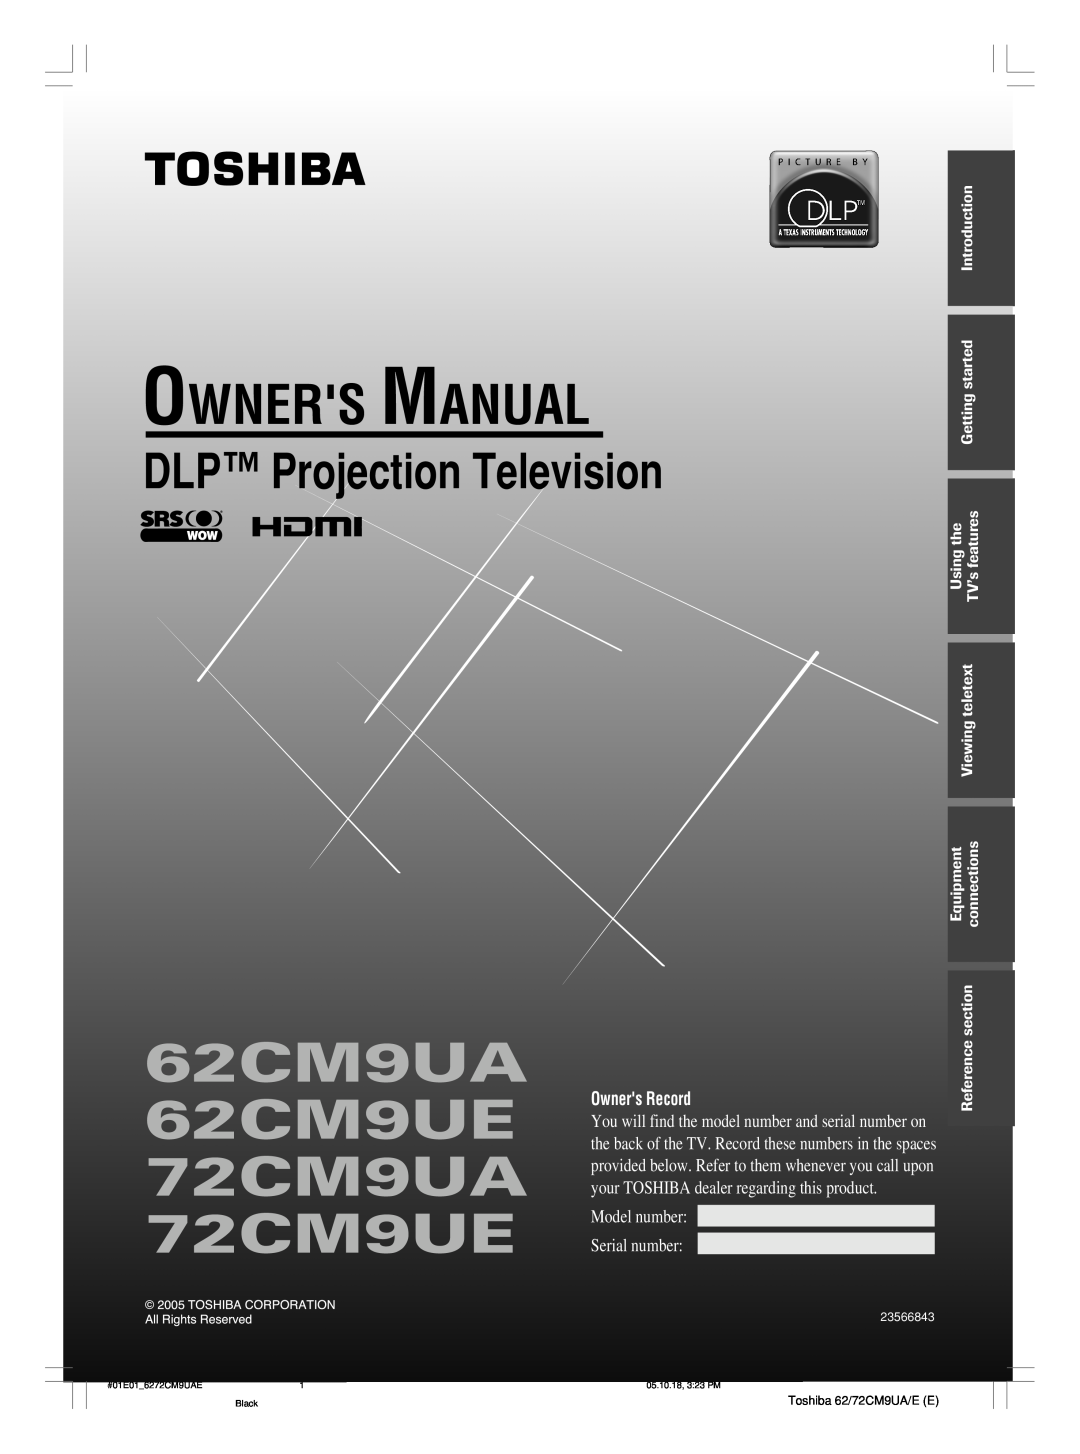 Toshiba 72CM9UE owner manual Introduction Getting started, Usingthe, TV’sfeatures, Viewingteletext, Equipment, connections 